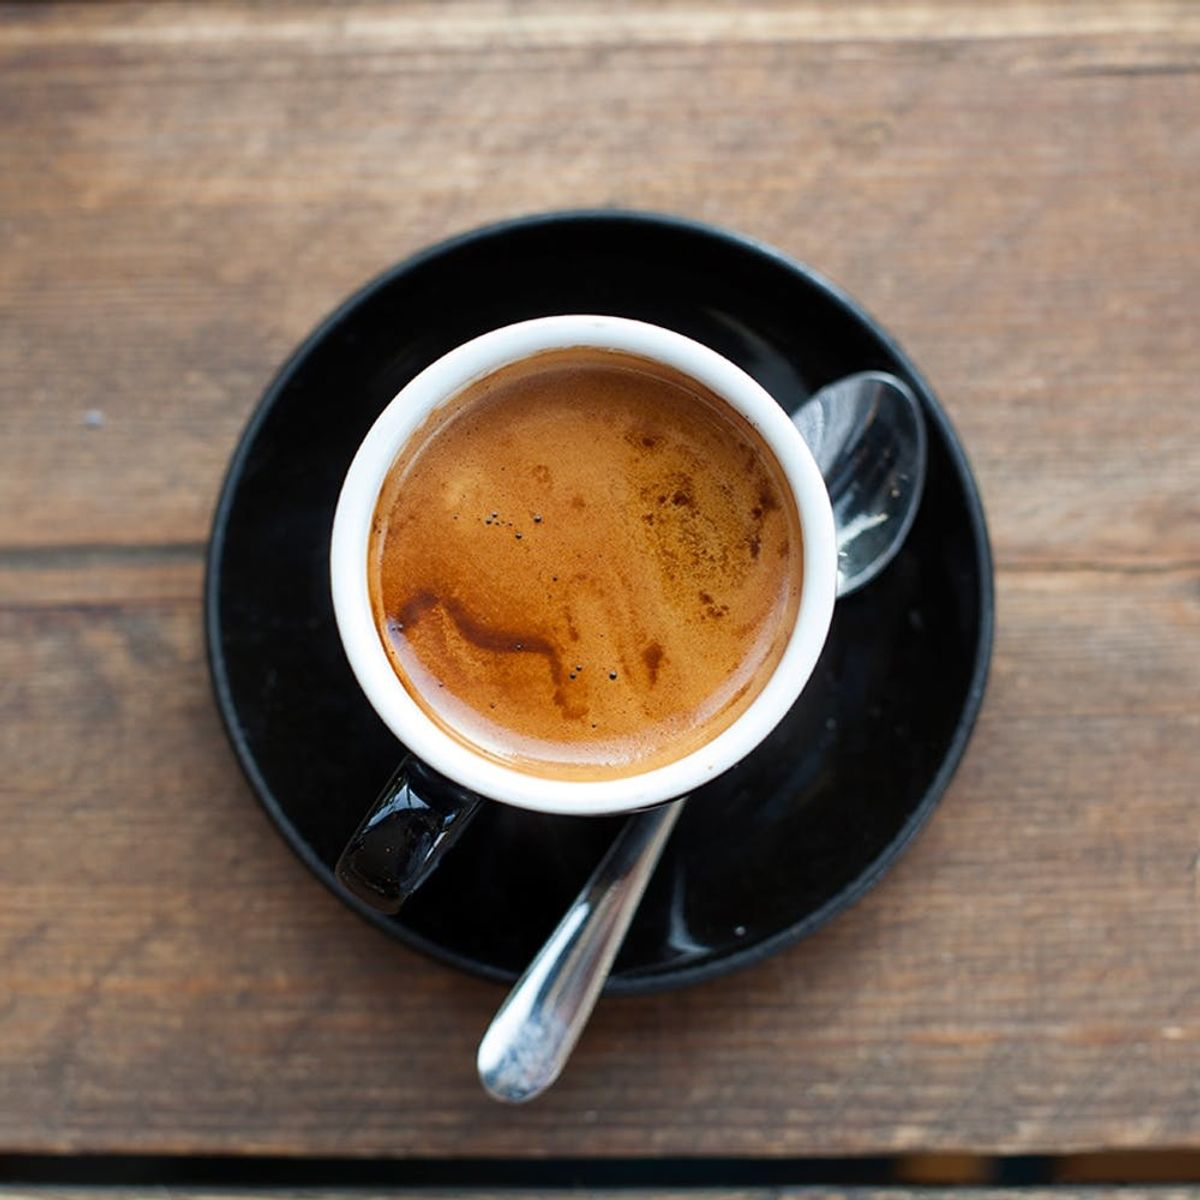 5 Easy Ways to Give Your Coffee a Healthy Boost